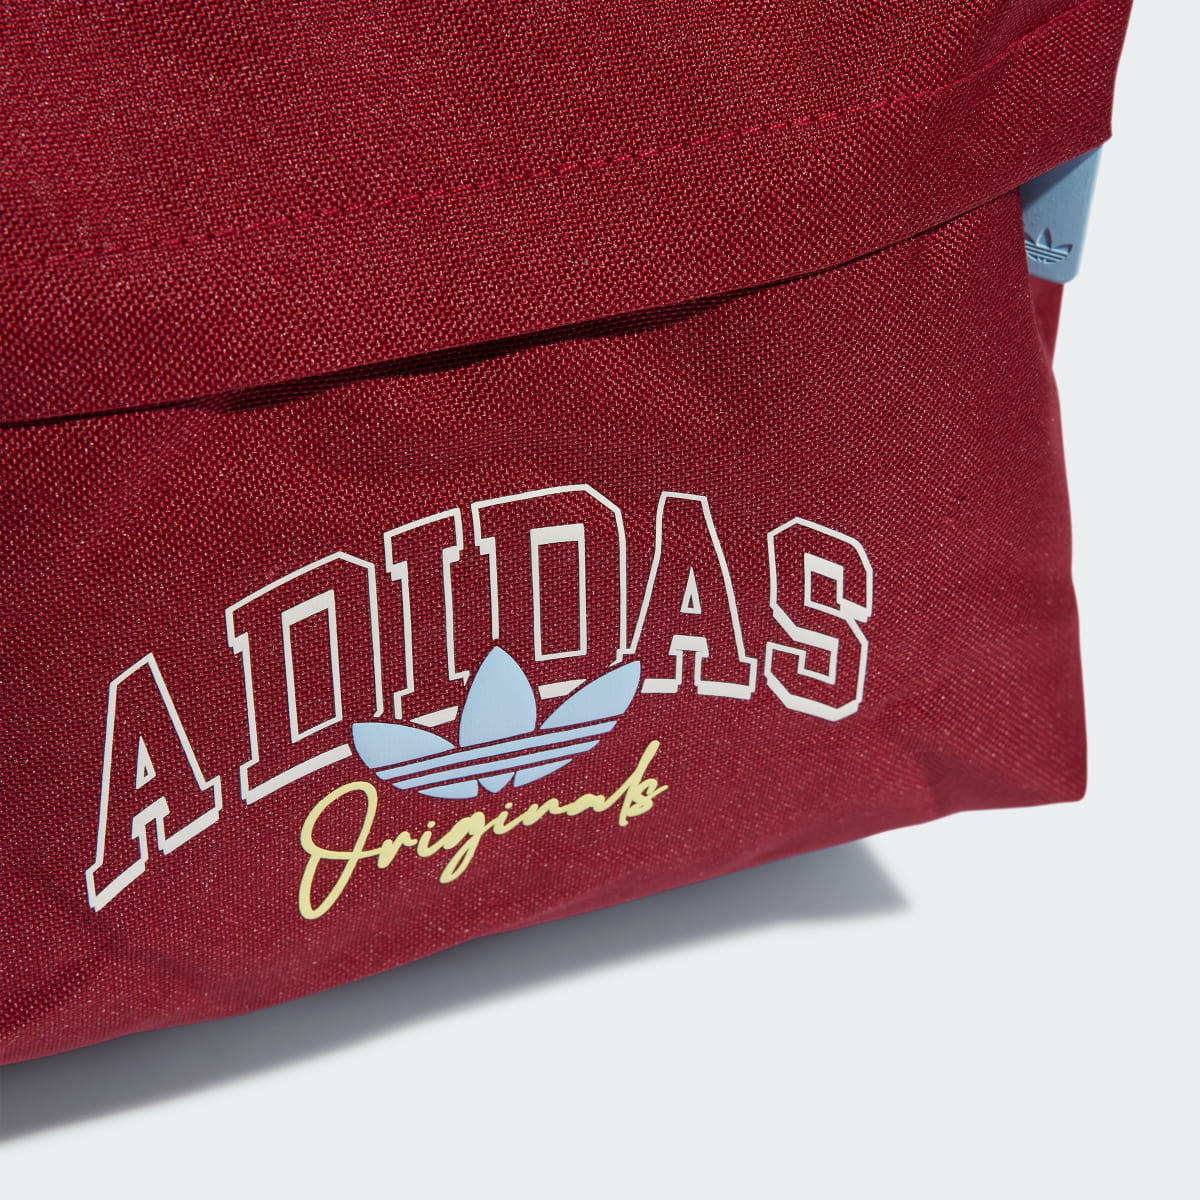 Adidas Collegiate Youth Backpack. 6